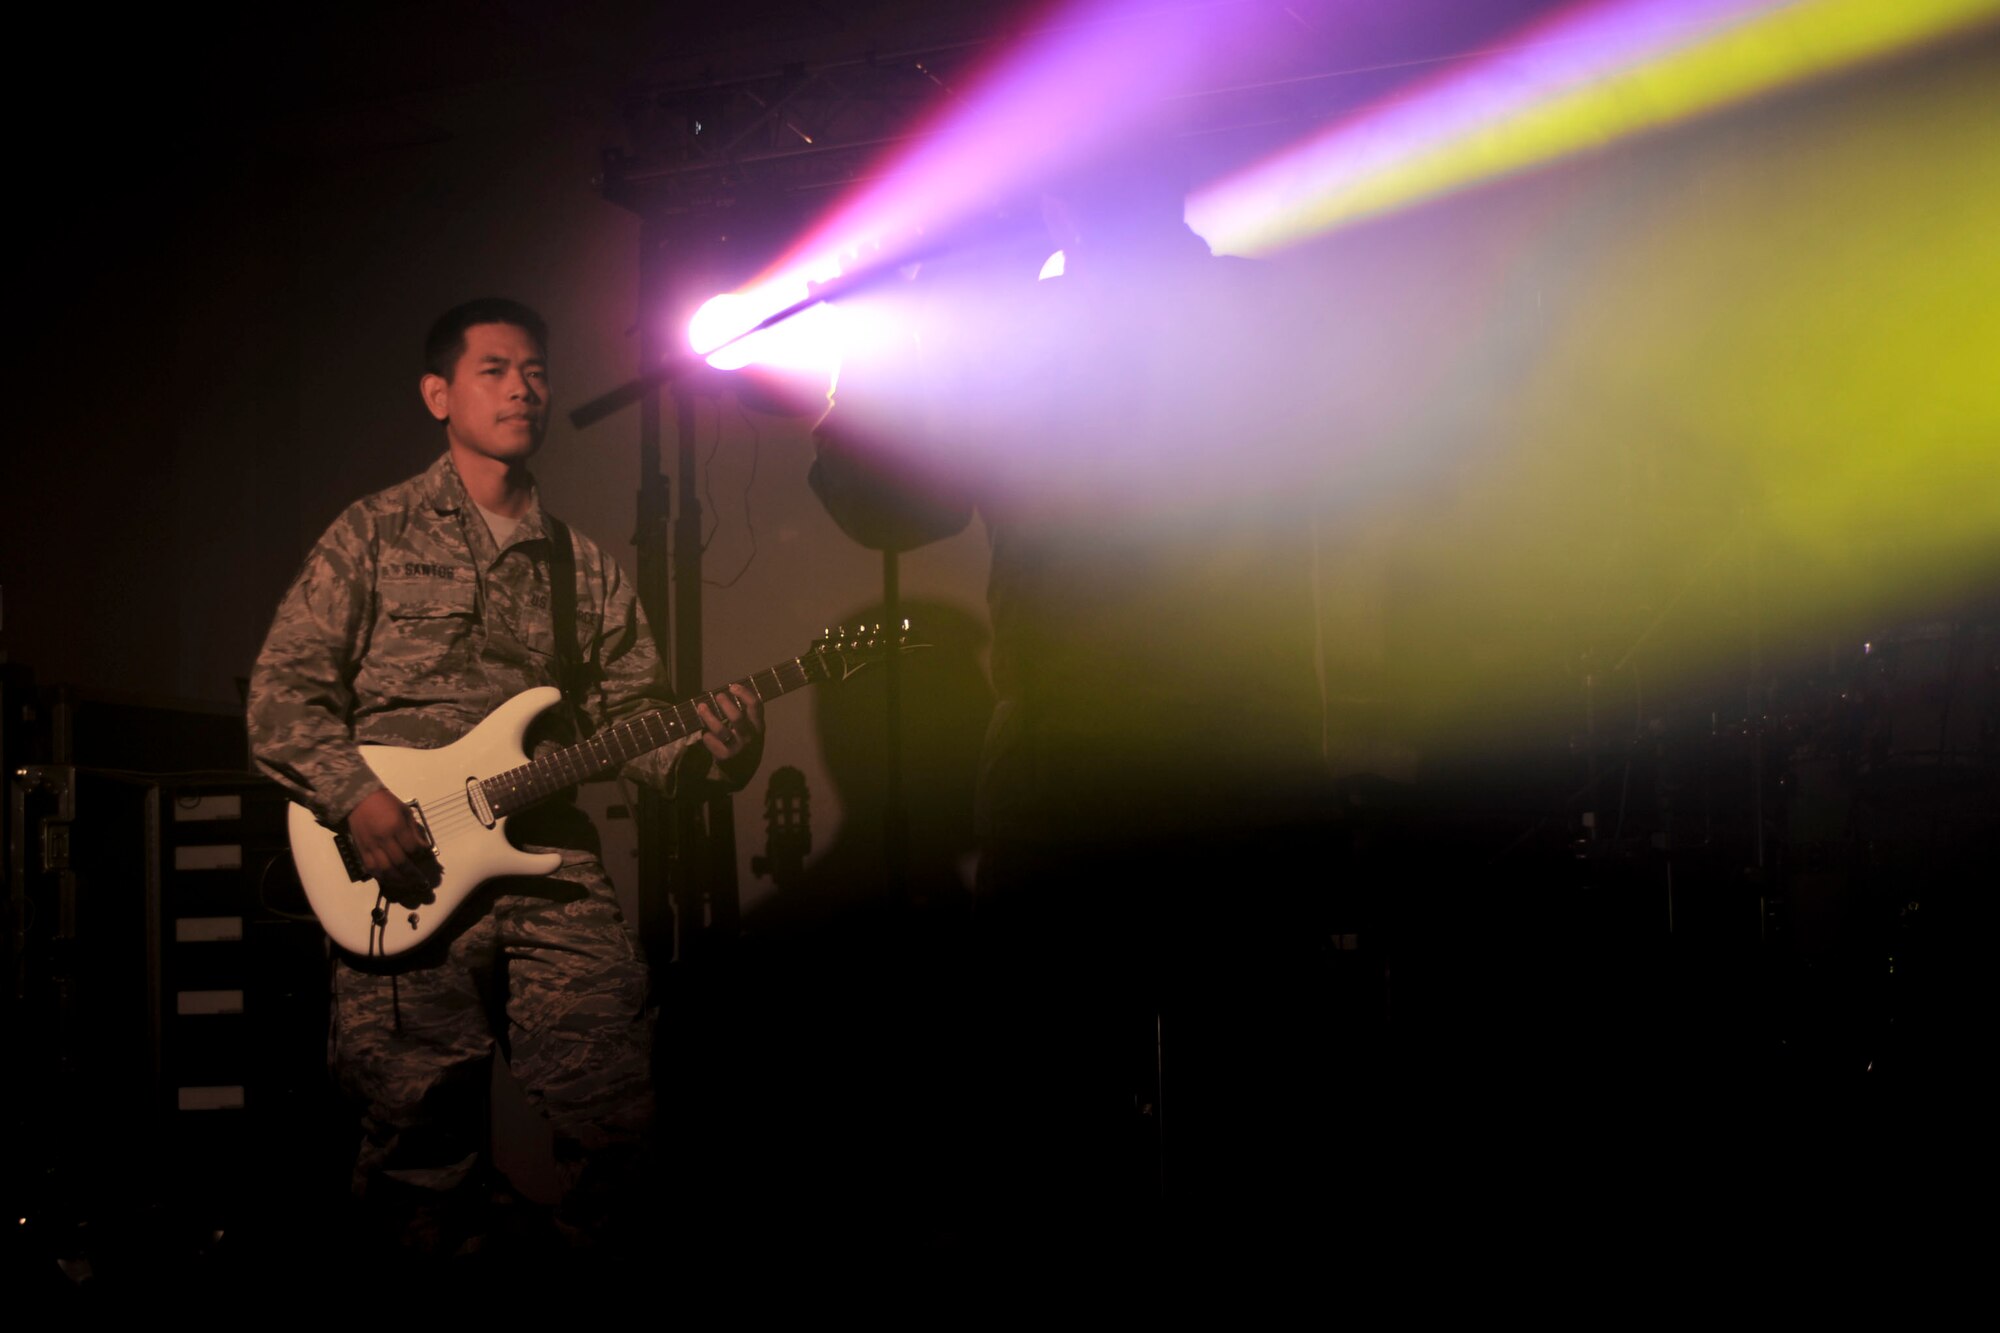 U.S. Air Force Staff Sgt. Daniel Santos, Full Spectrum guitarist, plays during a rehearsal at Langley Air Force Base, Va., Jan. 20, 2016. The band was originally created in 2013 to support U.S. and coalition forces that were deployed to Southwest Asia. (U.S. Air Force photo by Tech. Sgt. Katie Gar Ward)